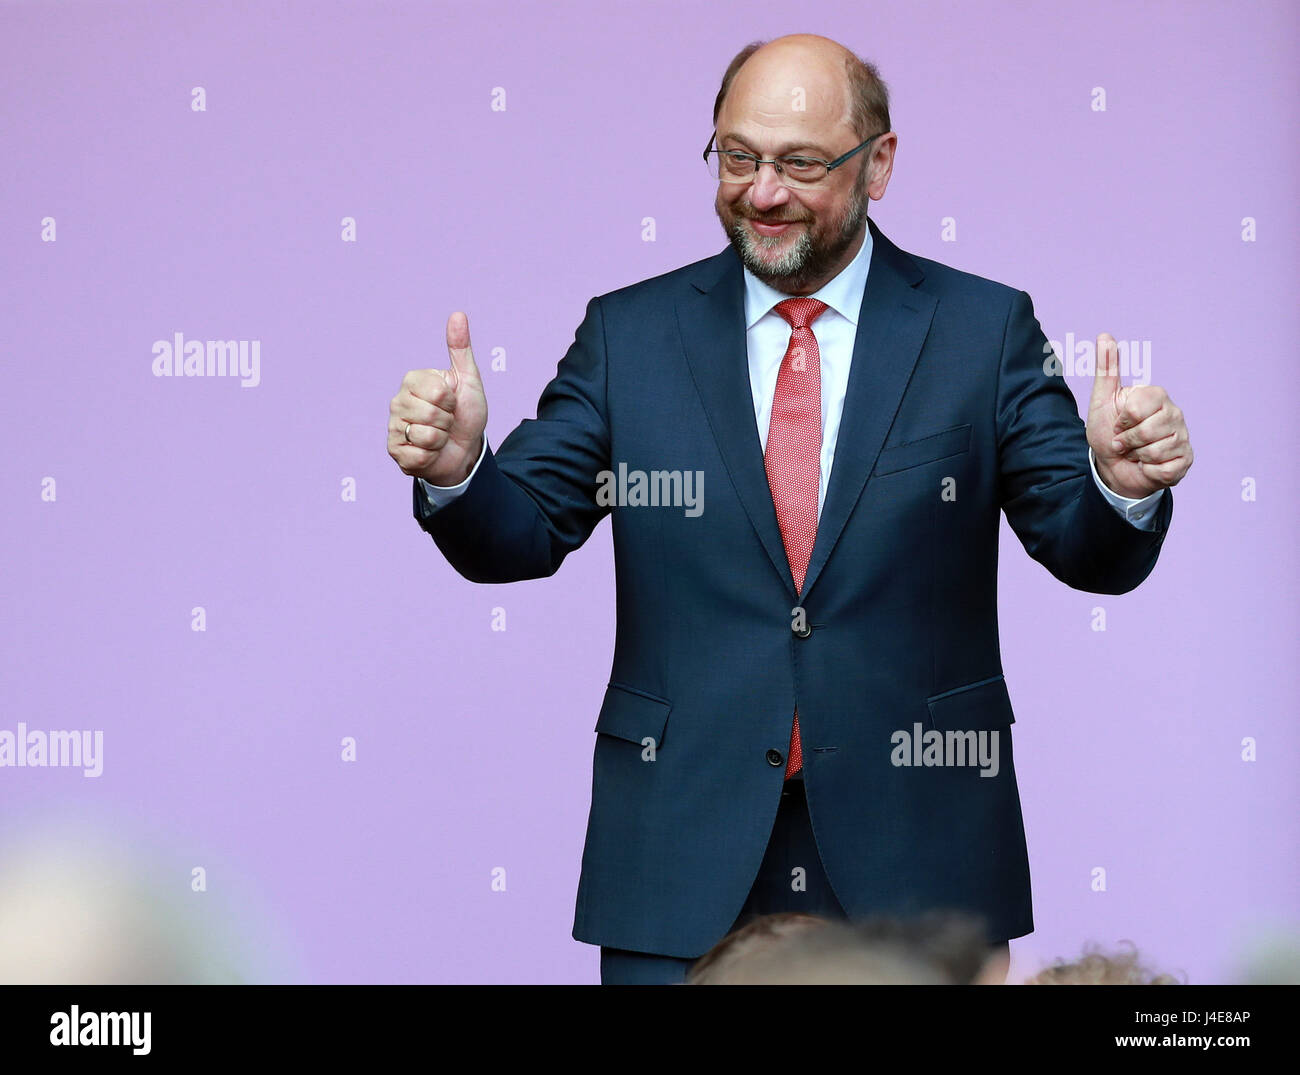 Duisburg, Germany. 13th May, 2017. Martin Schulz, leader of German Social Democrats (SPD), greets supporters at the final SPD campaign rally for the North Rhine-Westphalia state elections in Duisburg, Germany, on May 12, 2017. (Xinhua/Luo Huanhuan) Credit: Xinhua/Alamy Live News Stock Photo